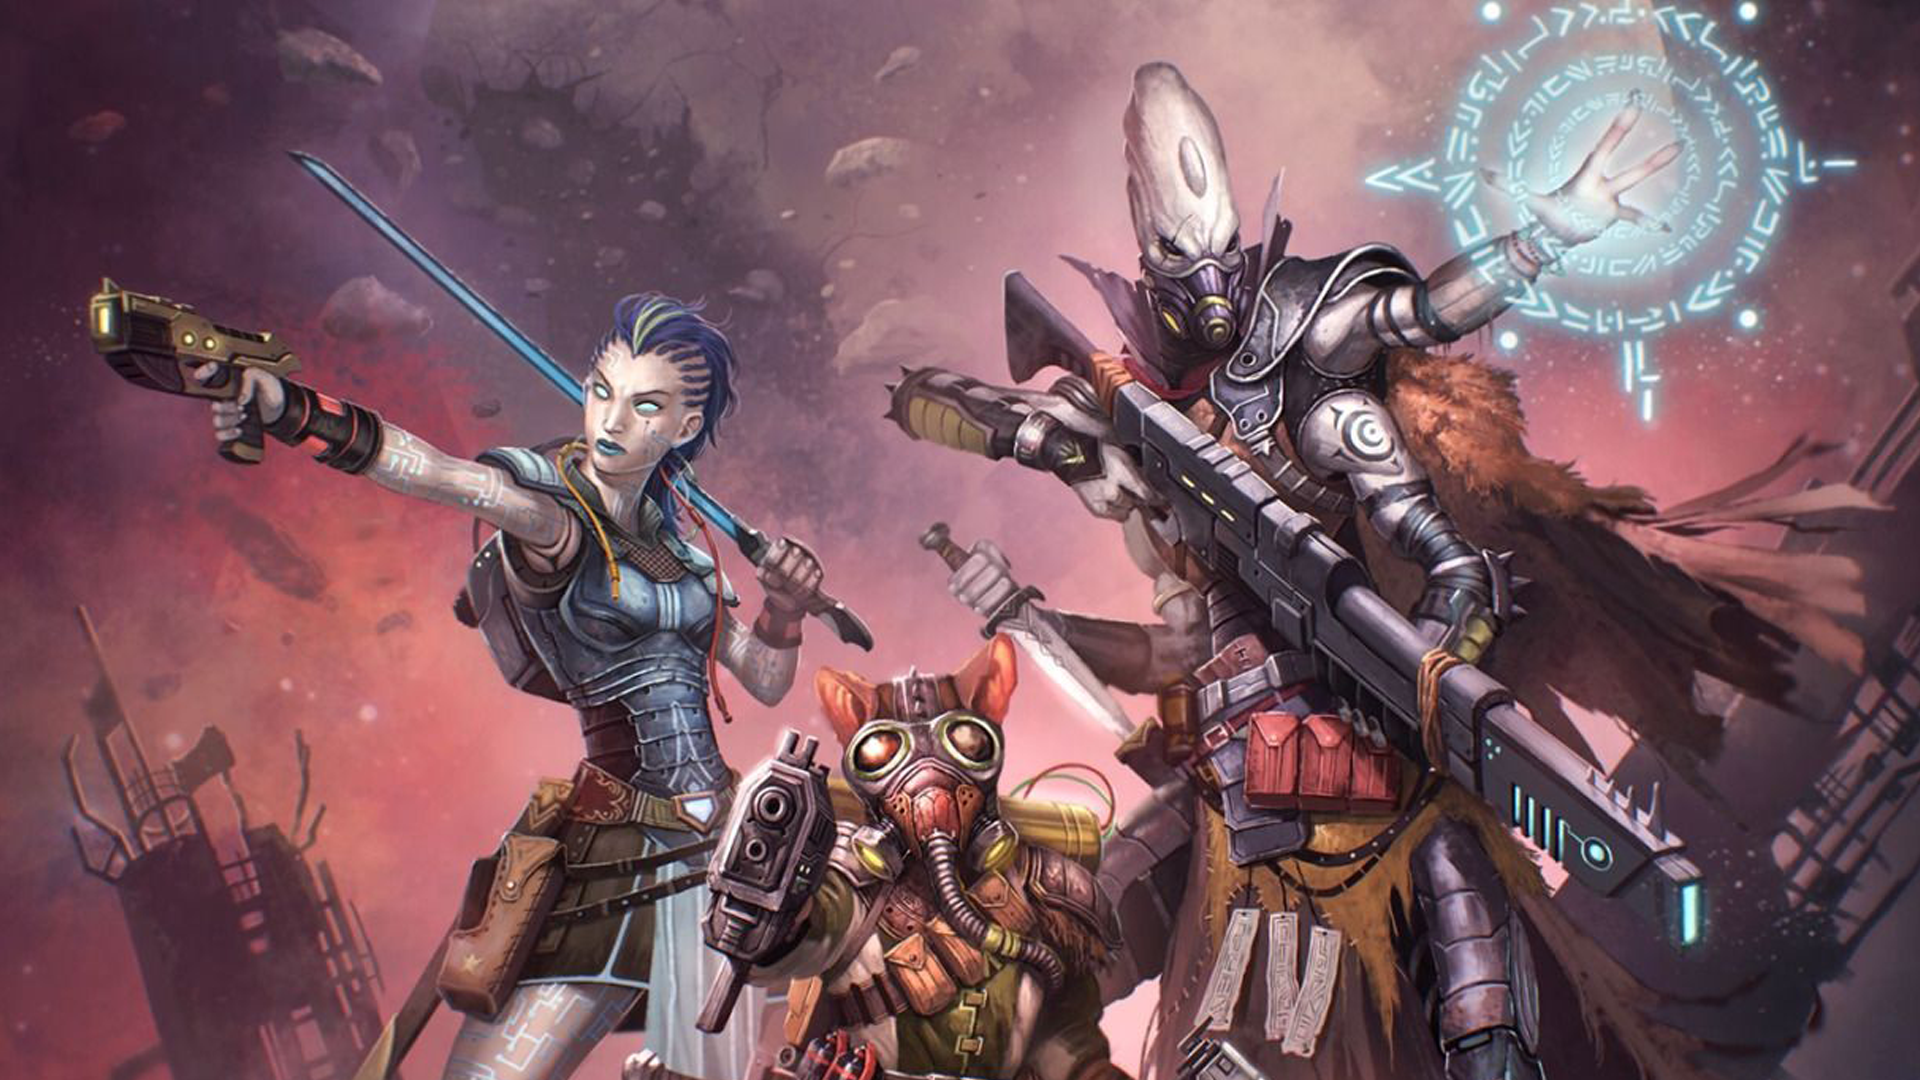 Image for Pathfinder studio to add narrative starship combat and revised classes in sci-fi RPG Starfinder Enhanced